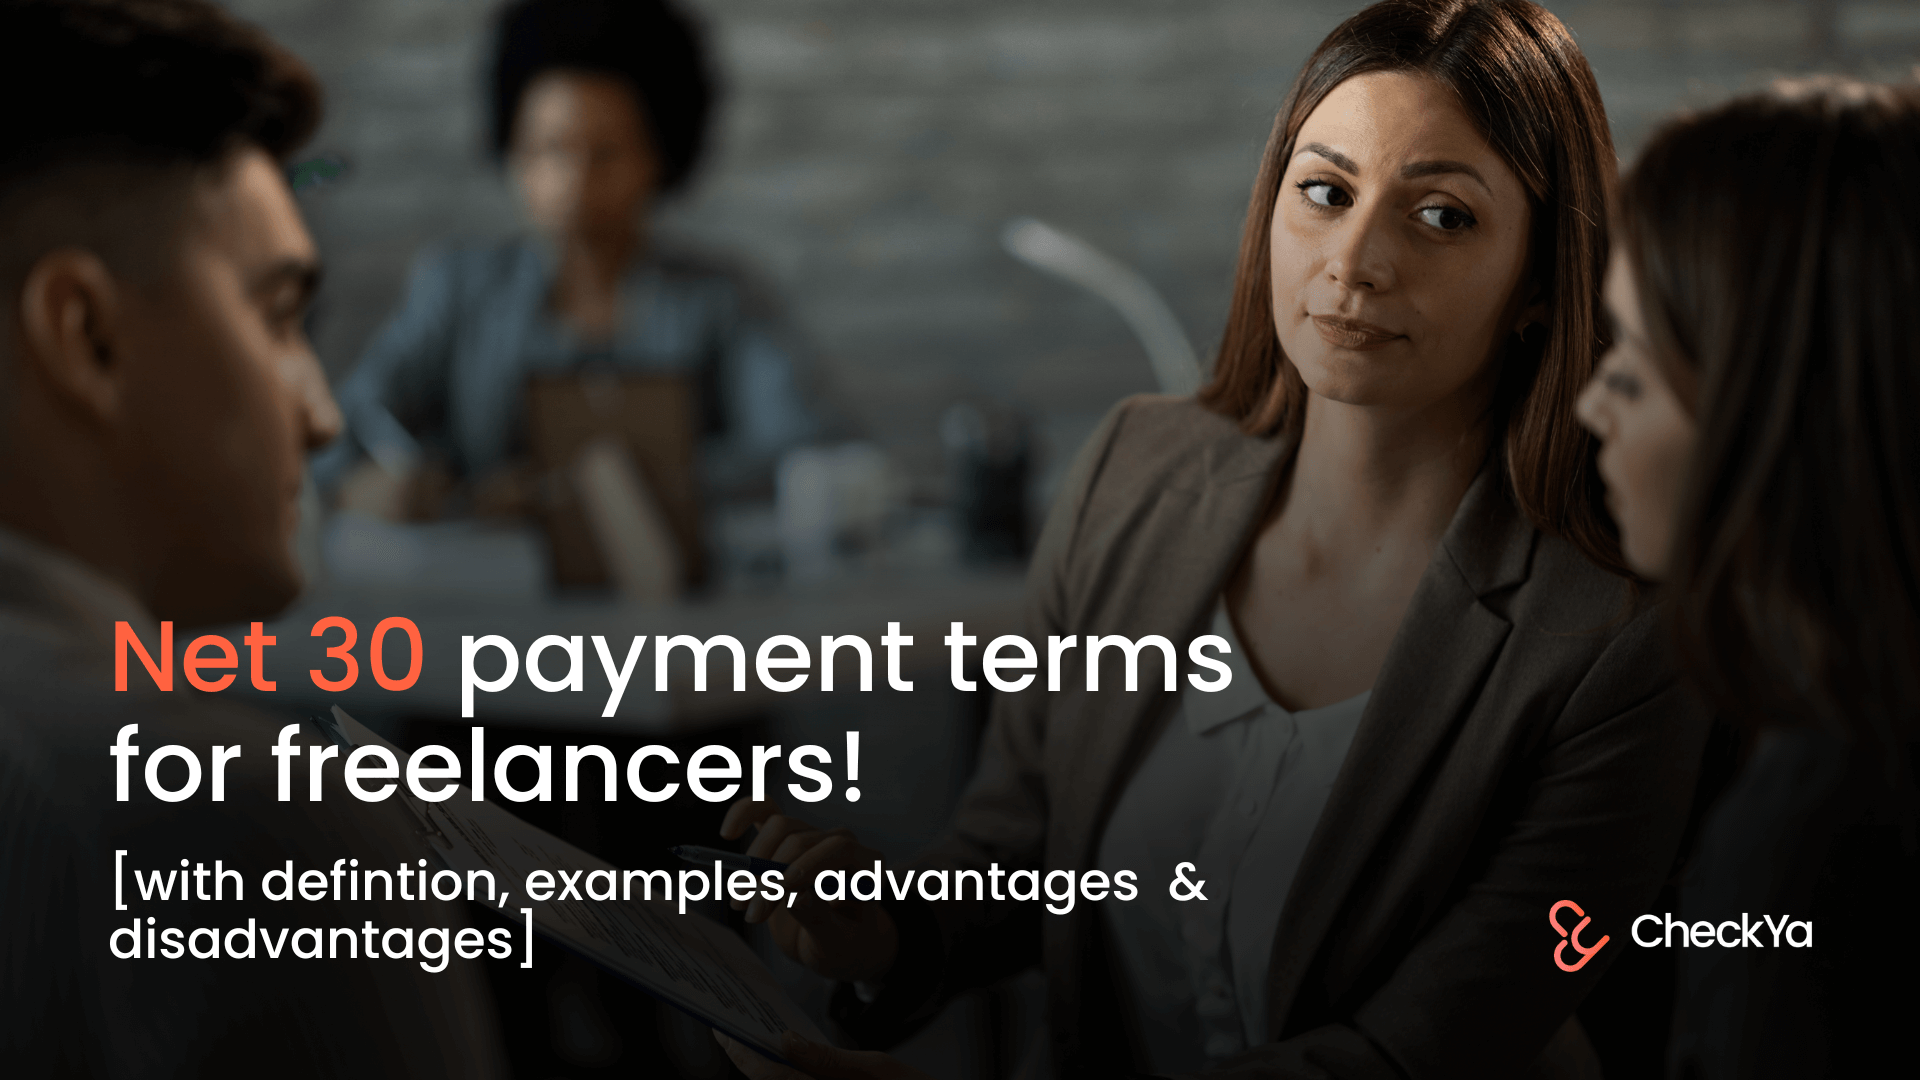 net-30-payment-terms-for-freelancers-examples-included